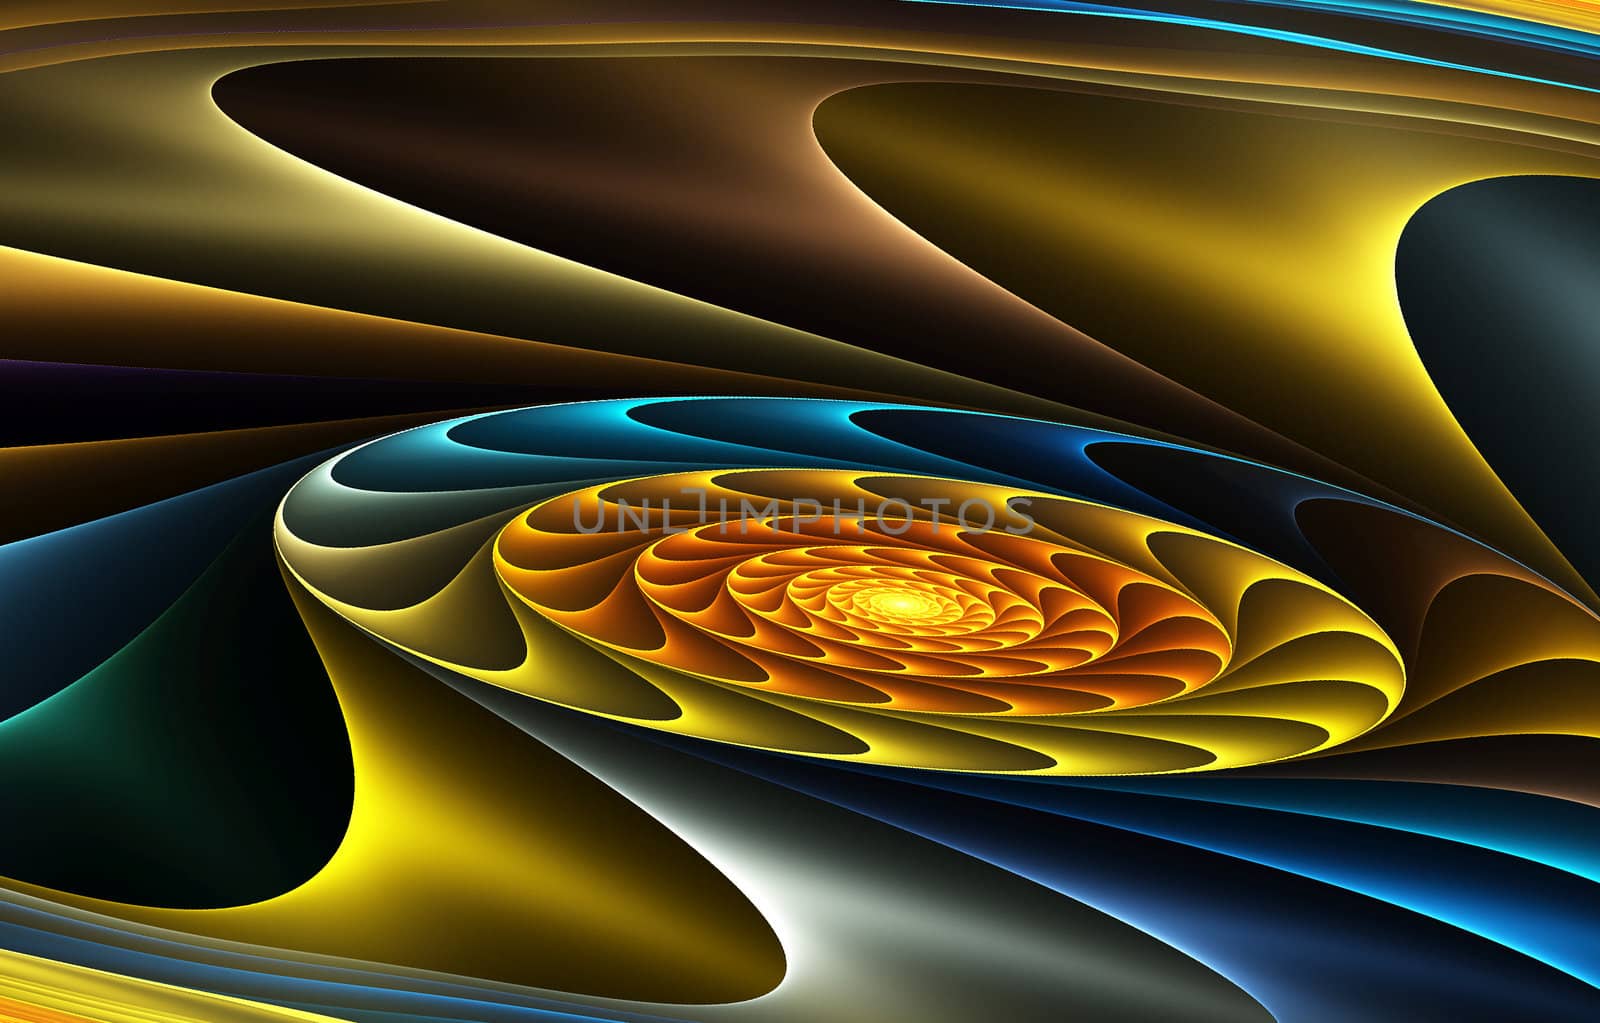 Abstract color image on a black background. Curves and ornaments futuristic design.